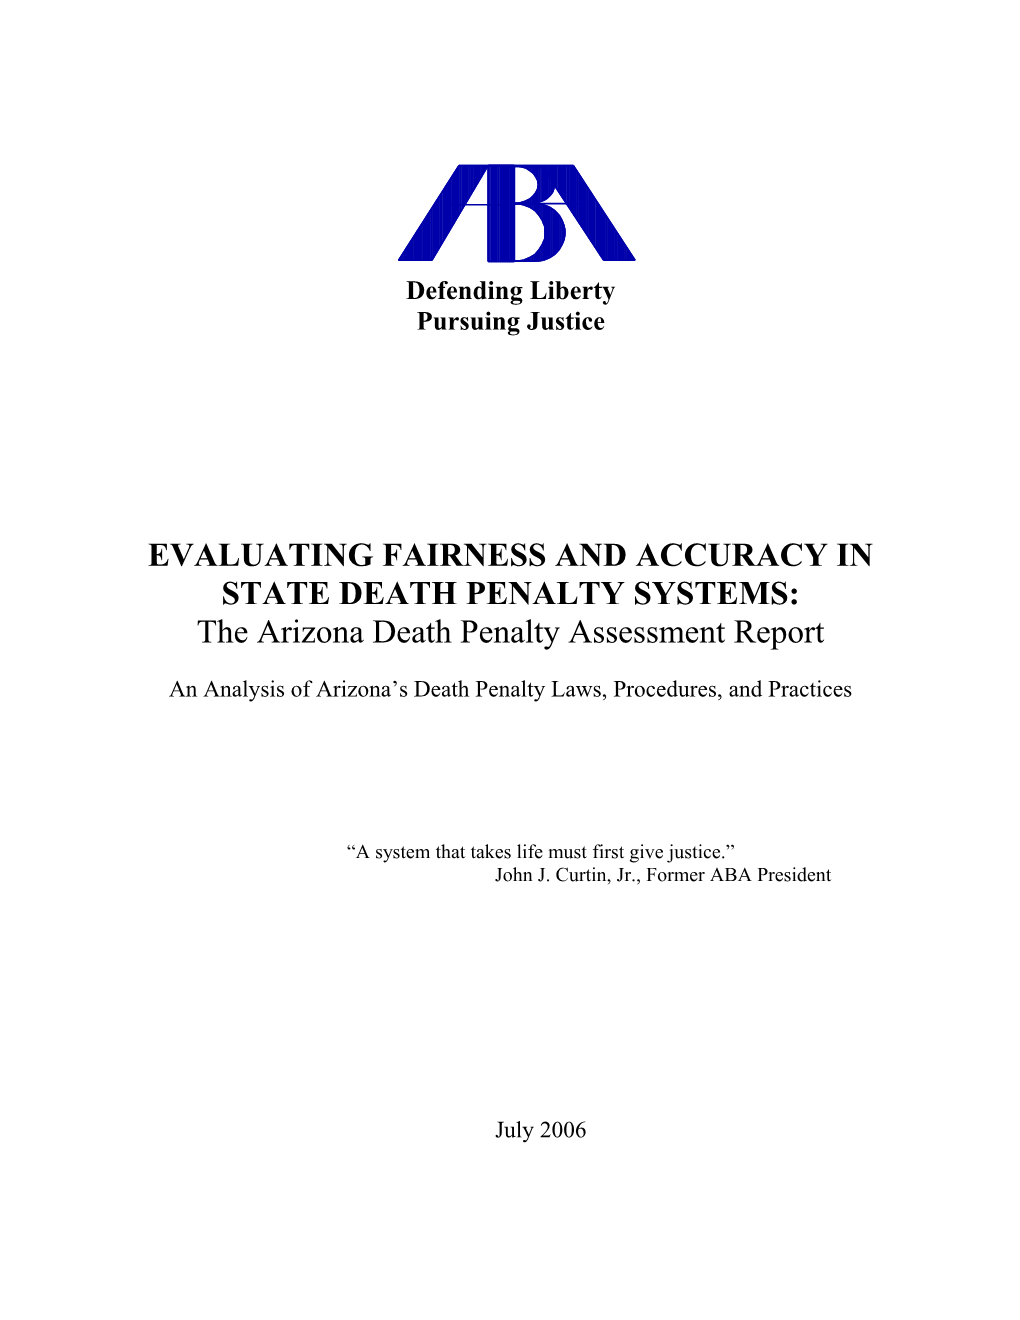 Evaluating Fairness and Accuracy in State Death Penalty Systems